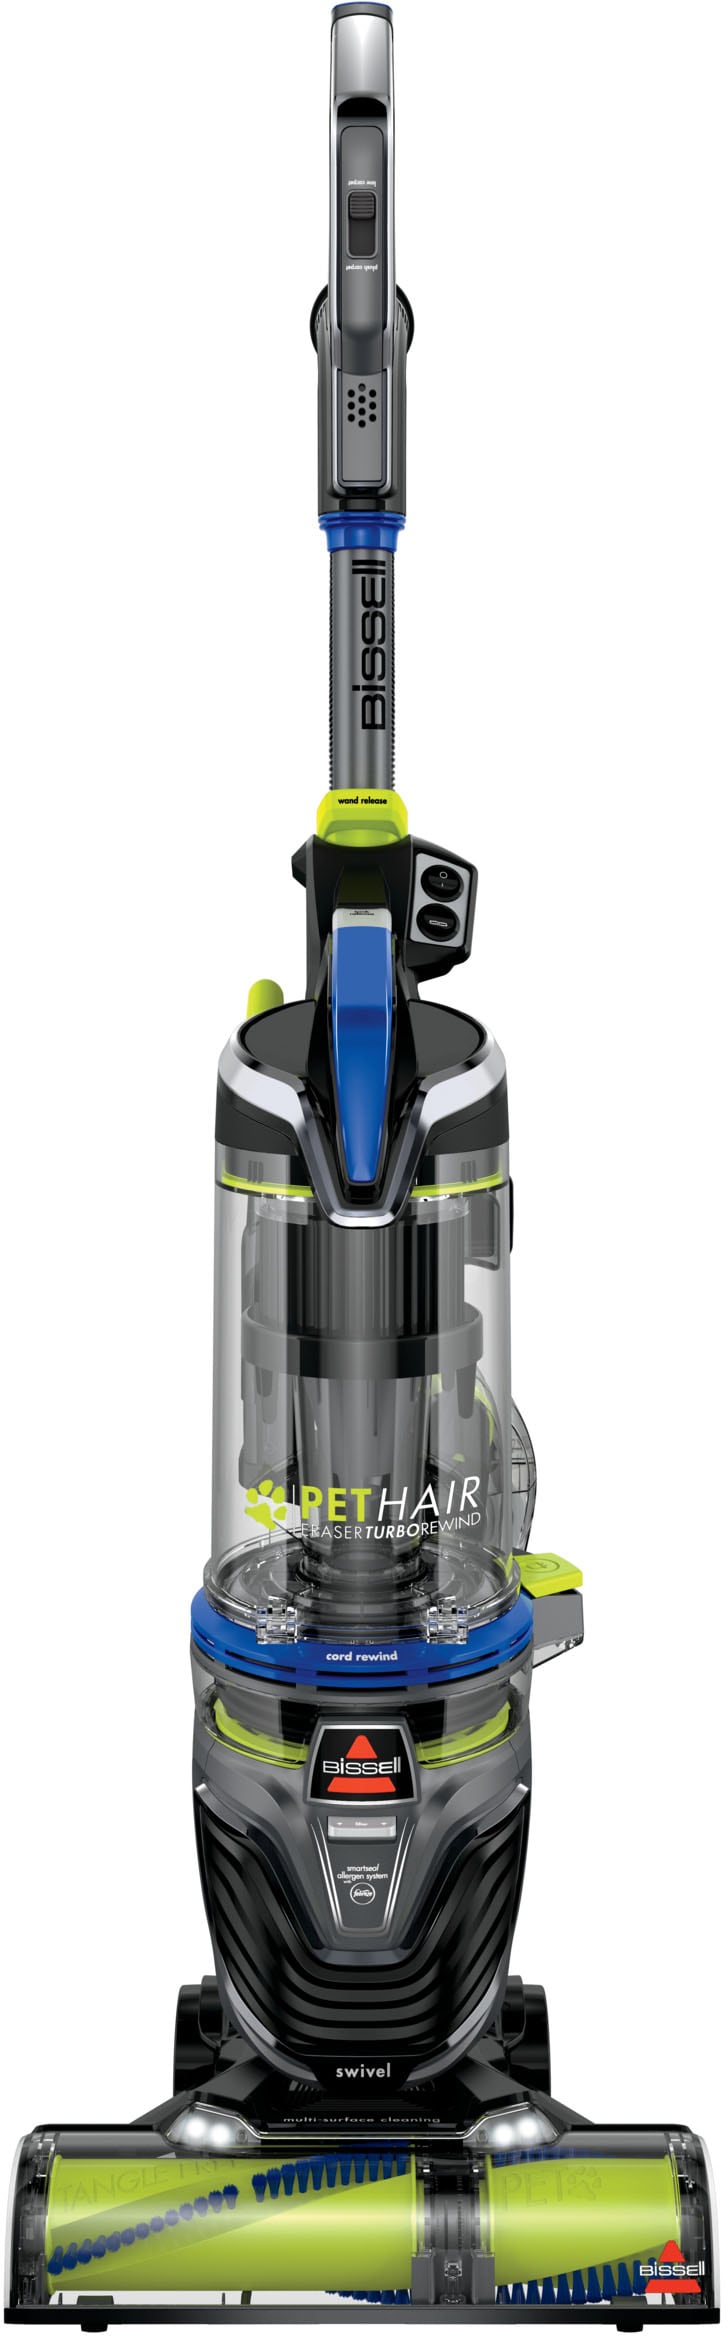 BISSELL Pet Hair Eraser Turbo Rewind Upright Vacuum - Cobalt Blue and Electric Green_0